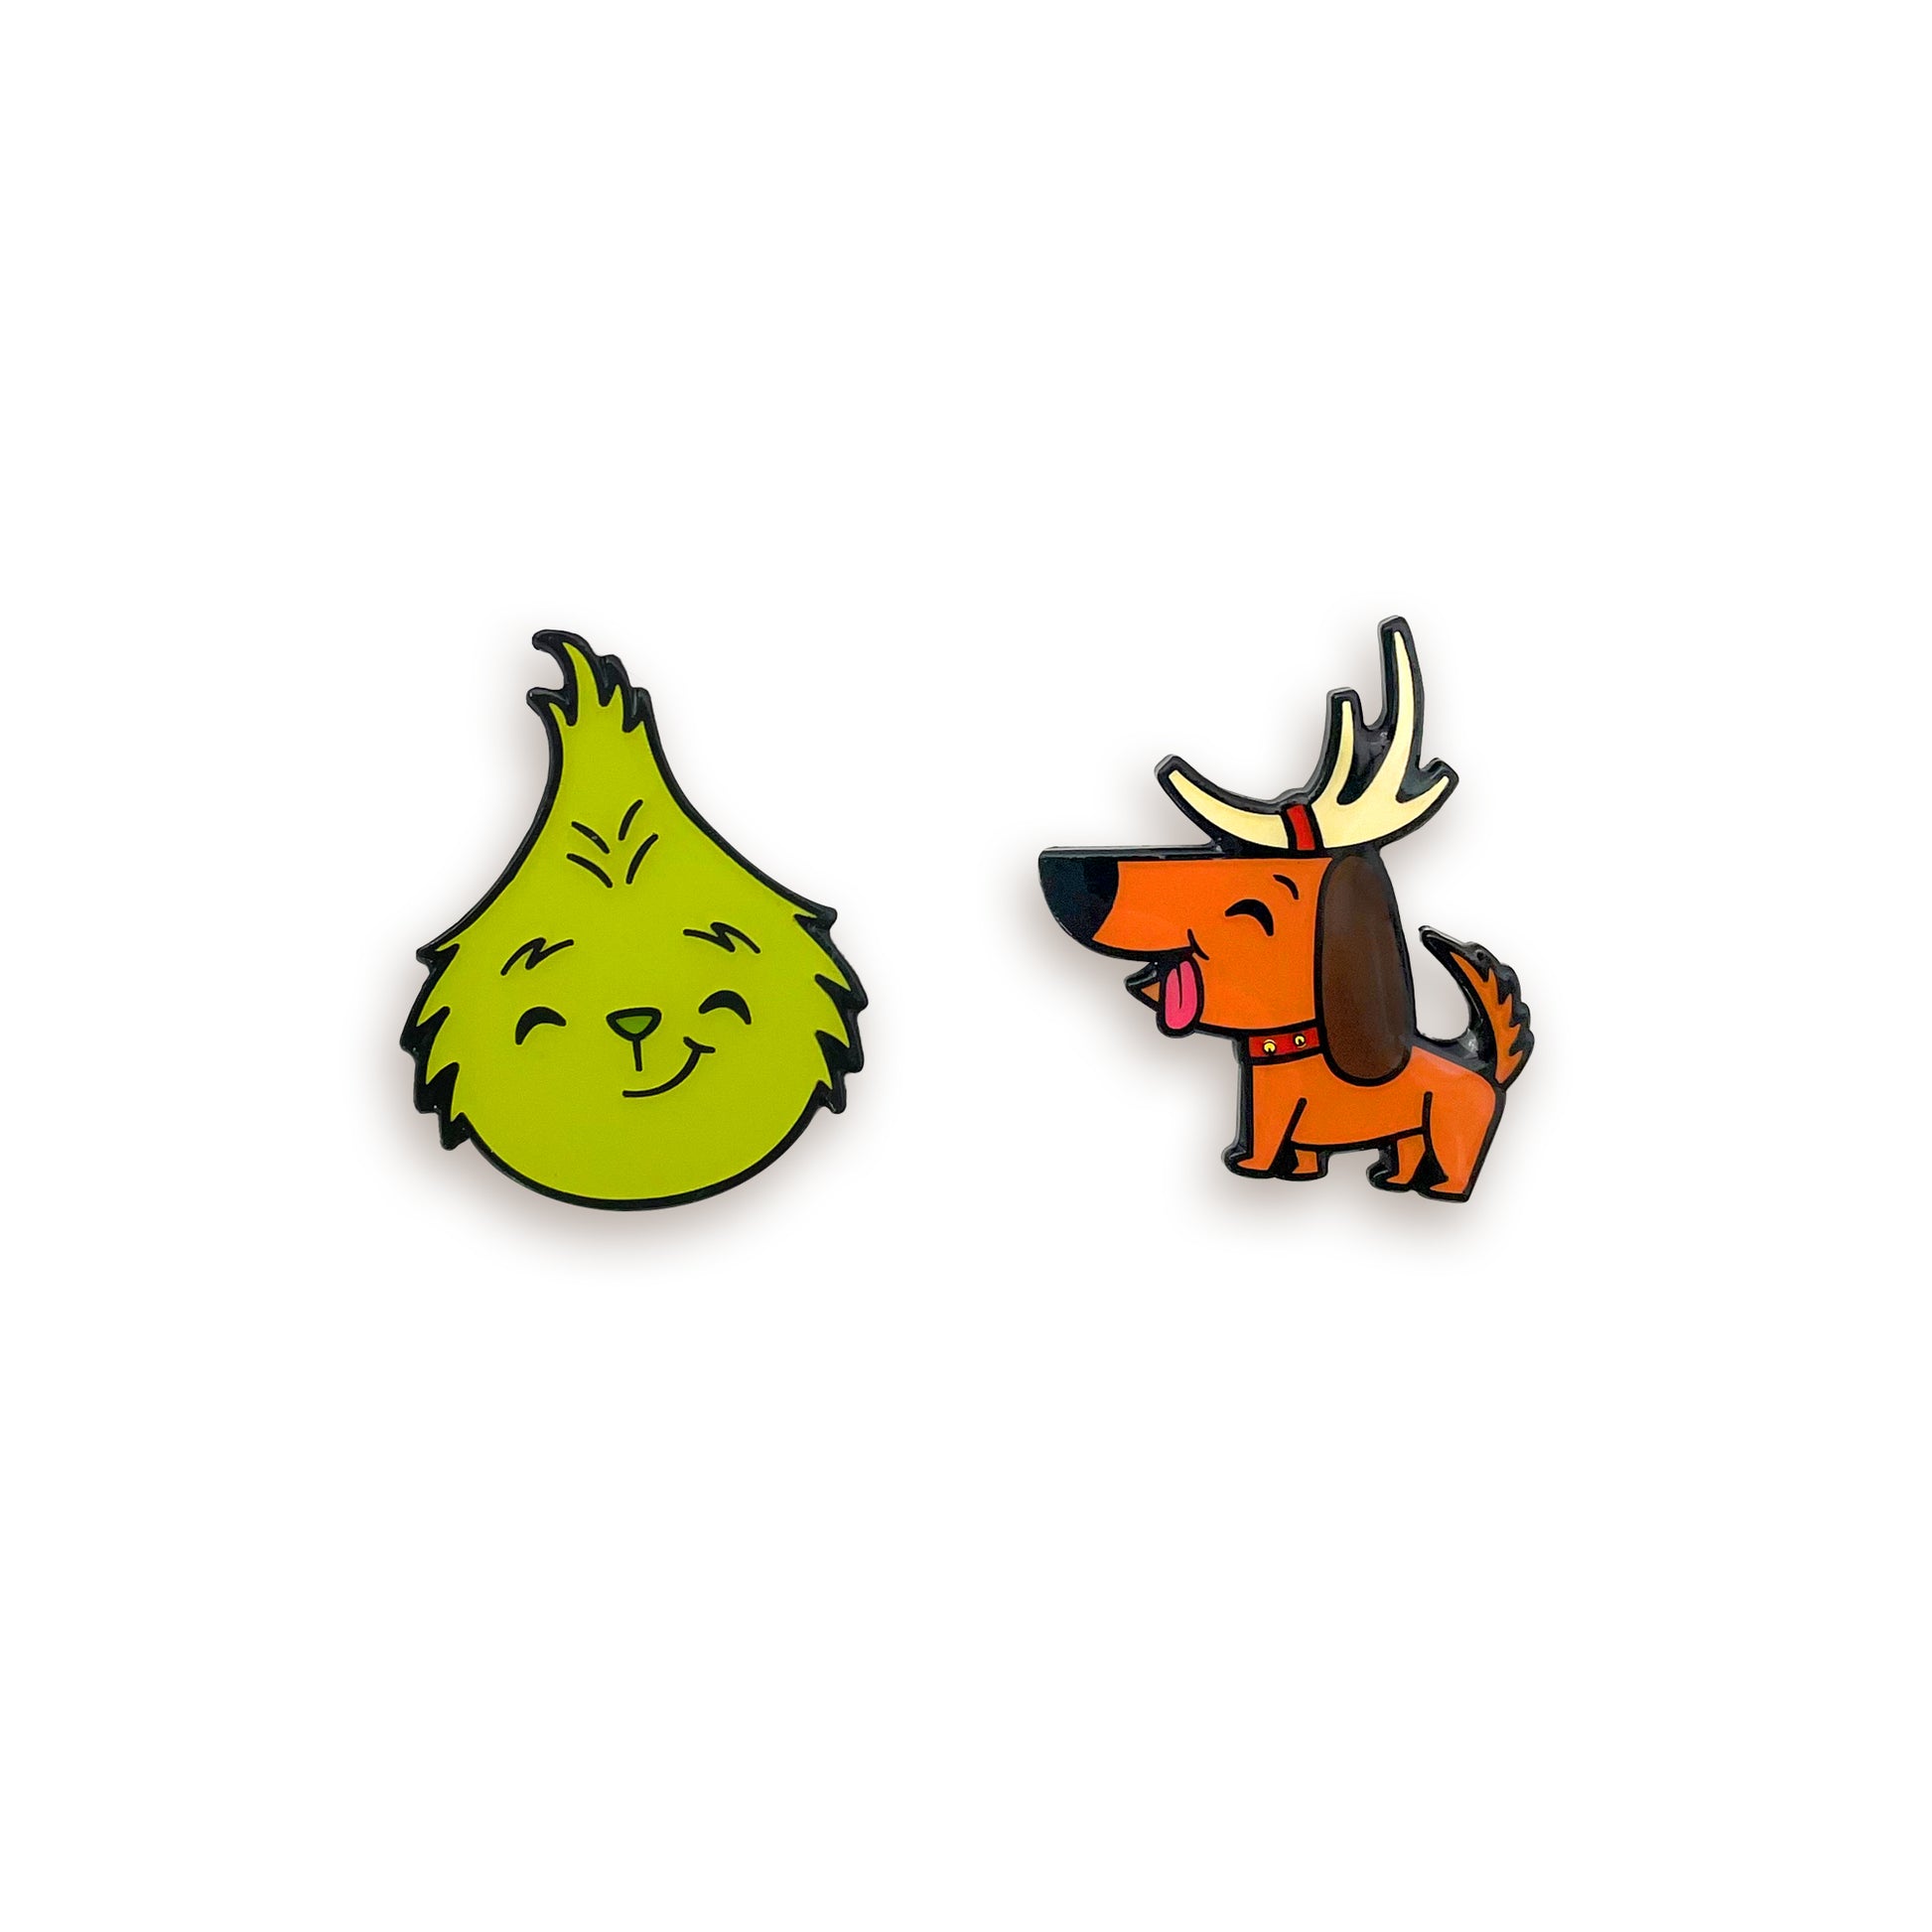 The Grinch and Max enamel pins on white background